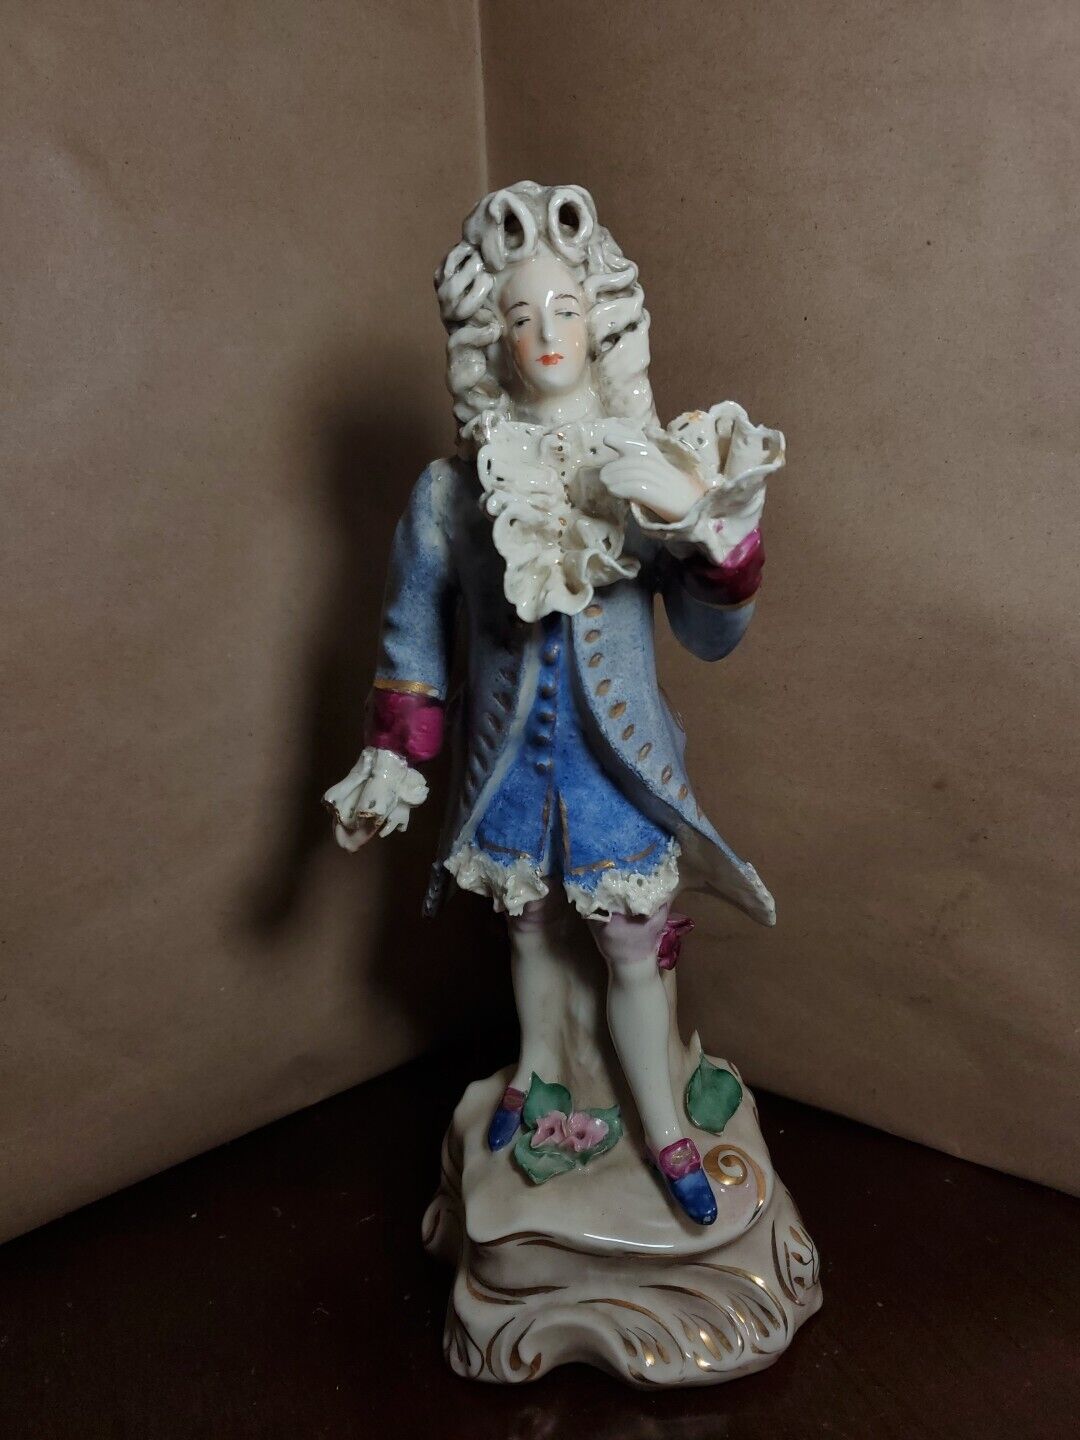 Vintage Cordey Porcelain French Rococo Man Figurine Statue 5041 Signed Numbered